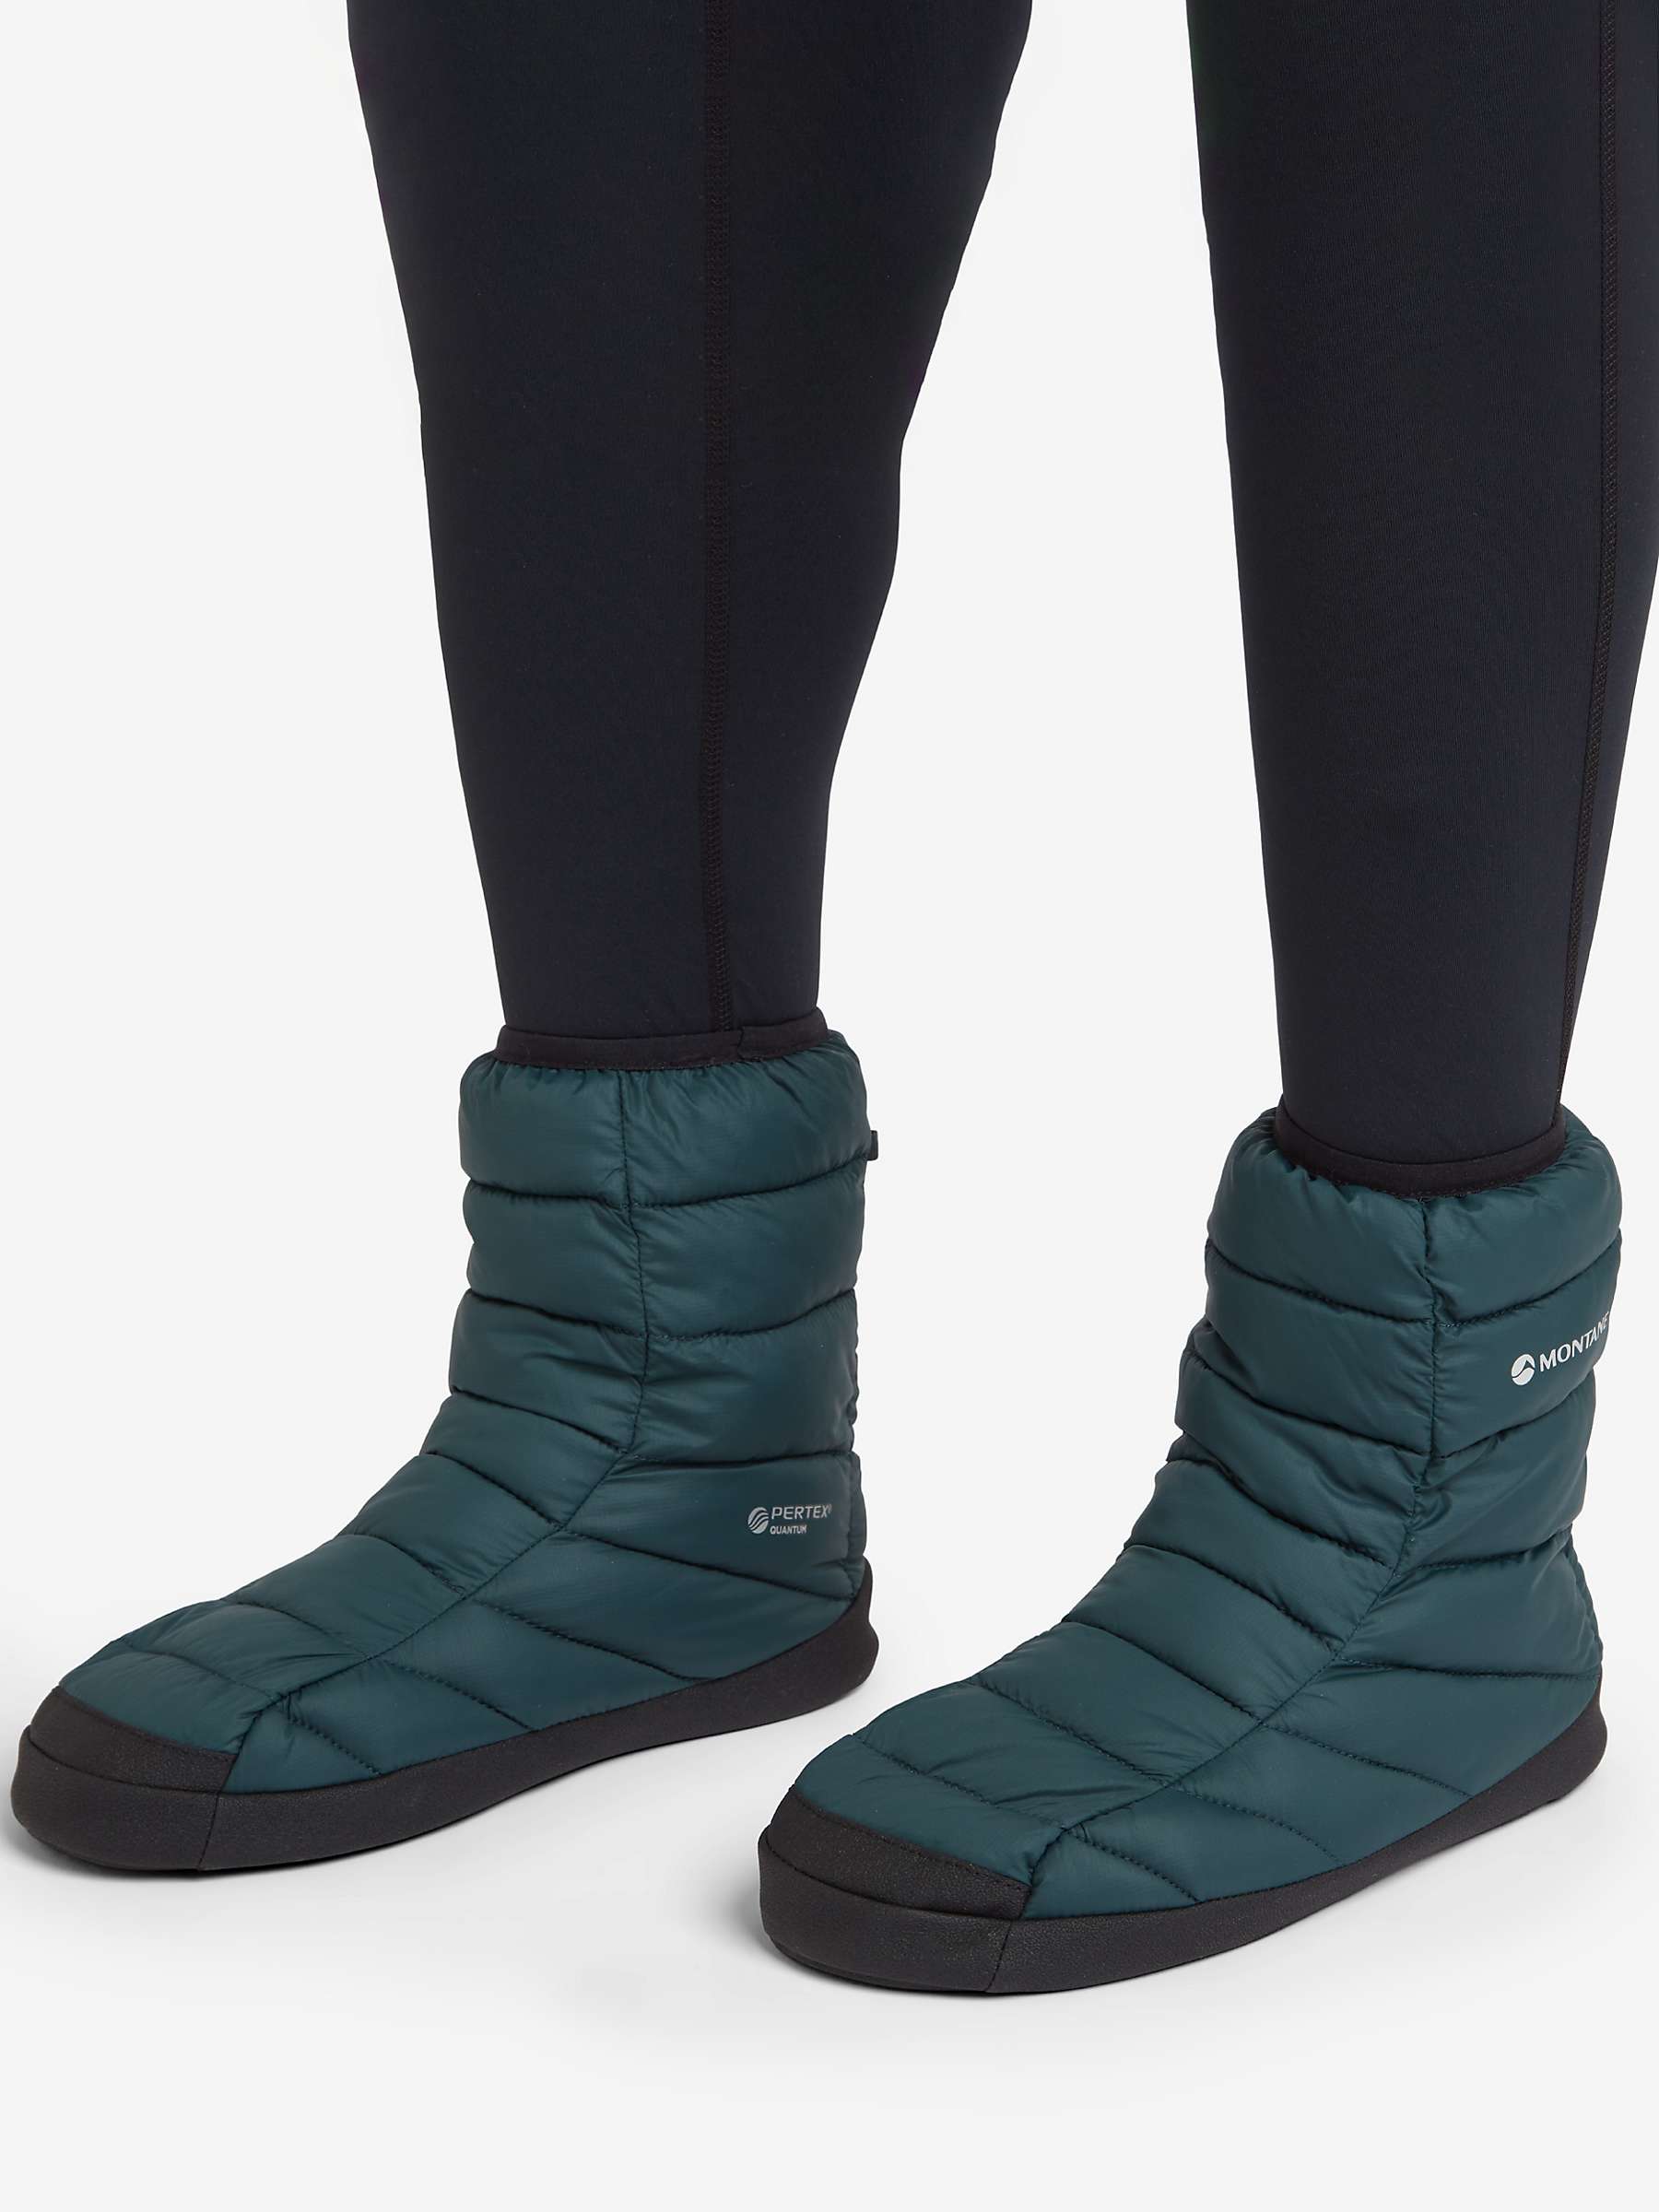 Buy Montane Women's Icarus Hut Recycled Boot Style Slippers Online at johnlewis.com